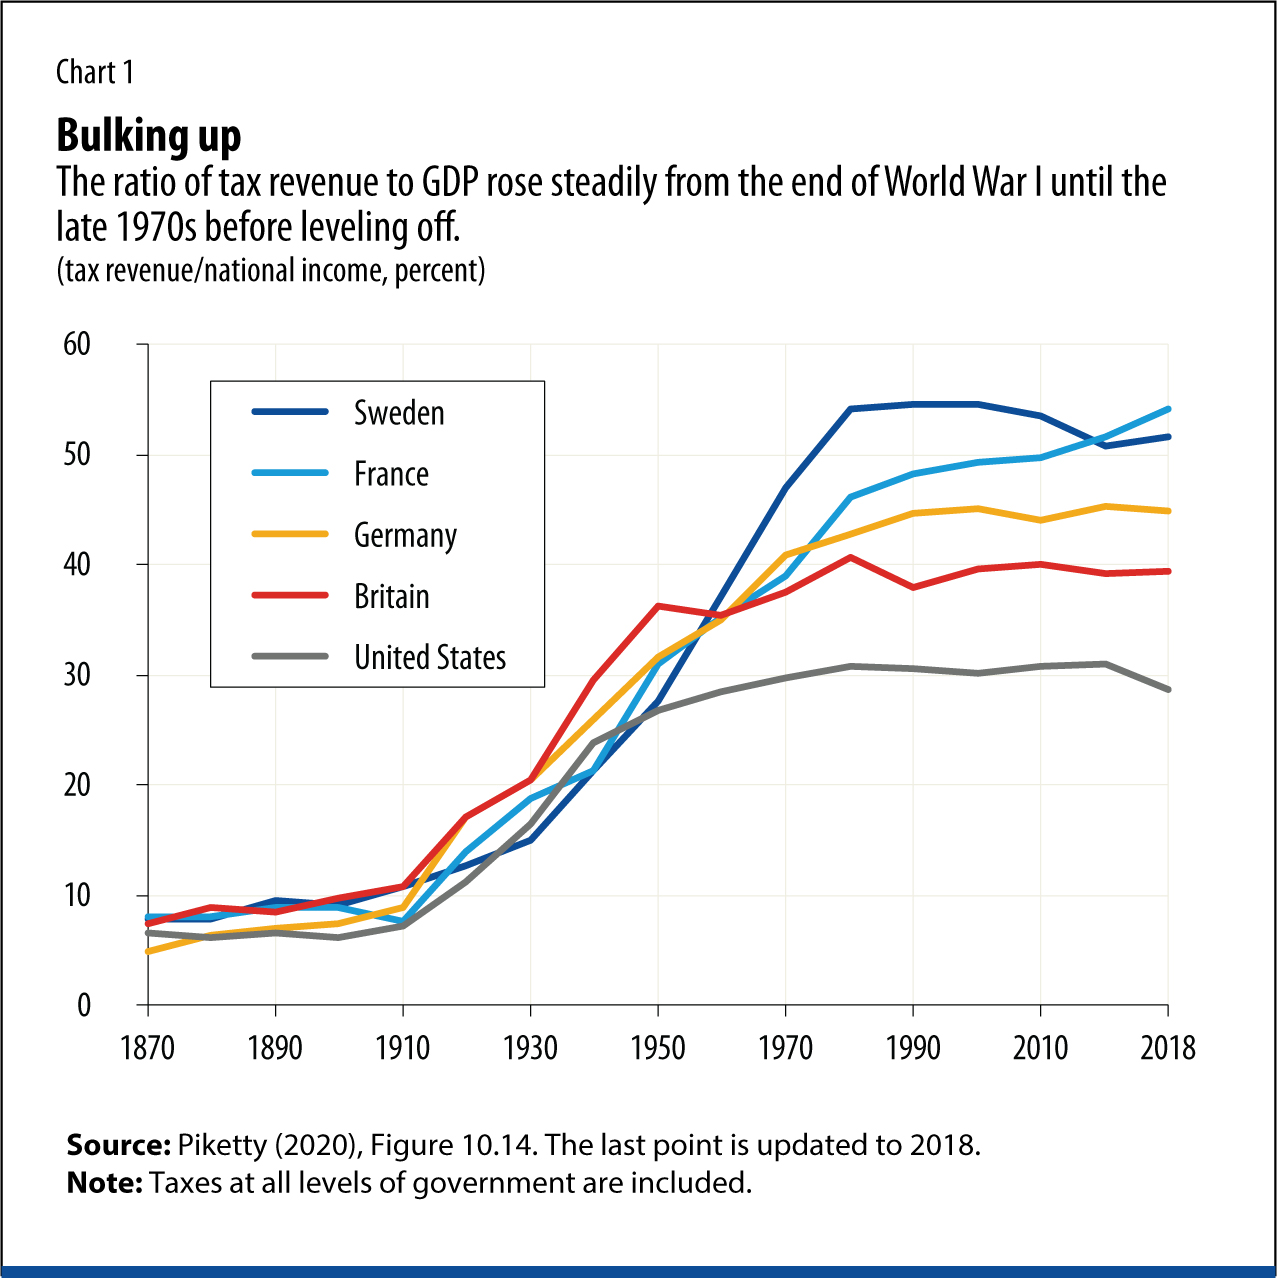 The ratio of tax revenue to GDP rose steadily from the end of World War I until the late 1970s before leveling off.